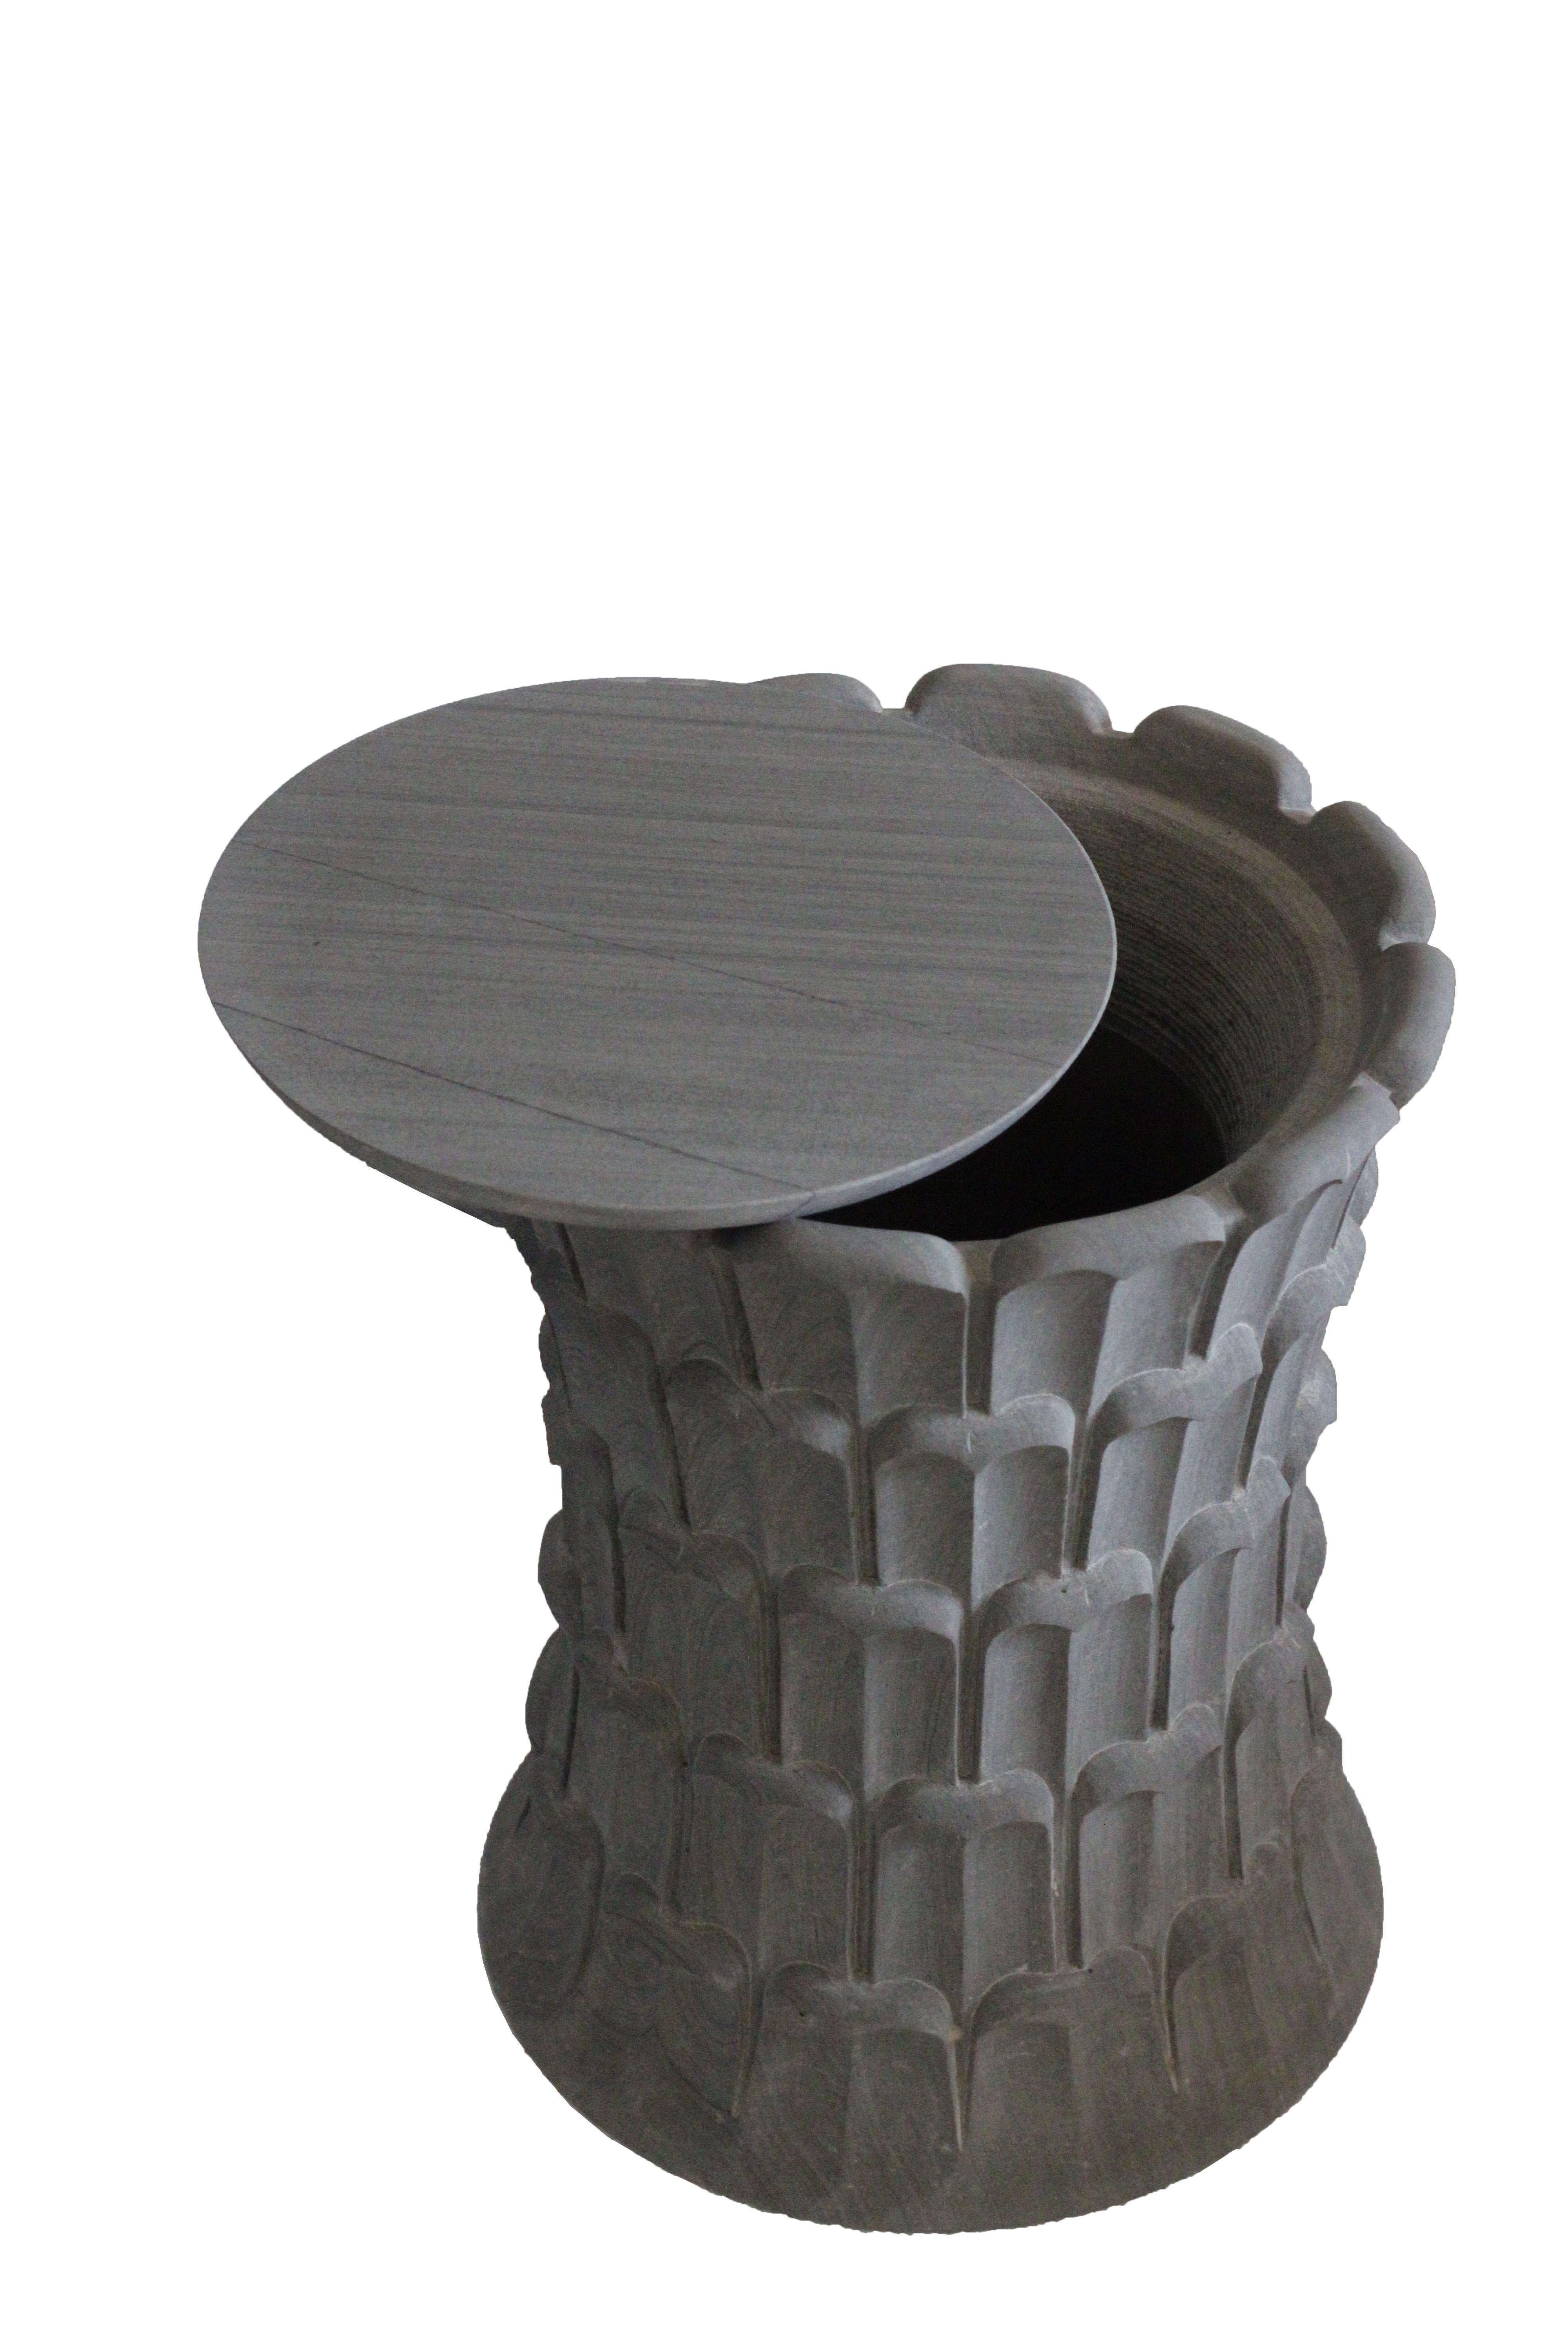 Other Date Palm Side Table In Agra Grey Stone Handcrafted in India For Sale